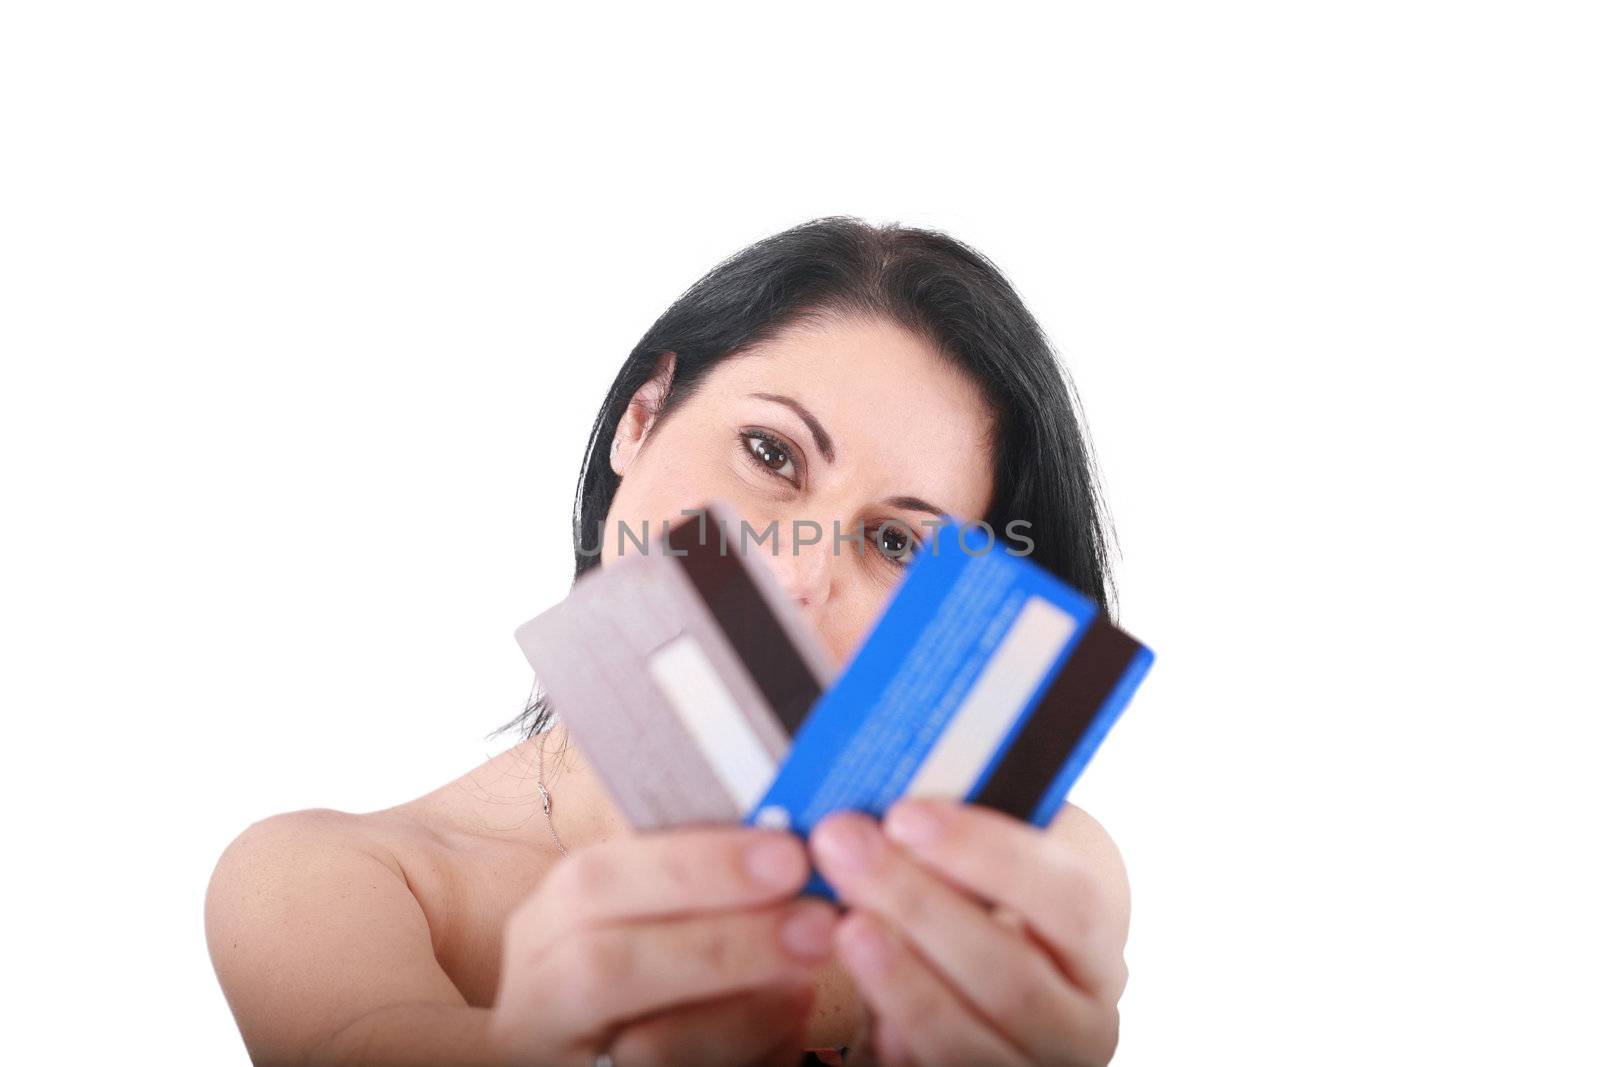 credit cards in a hand of the woman, focus on woman